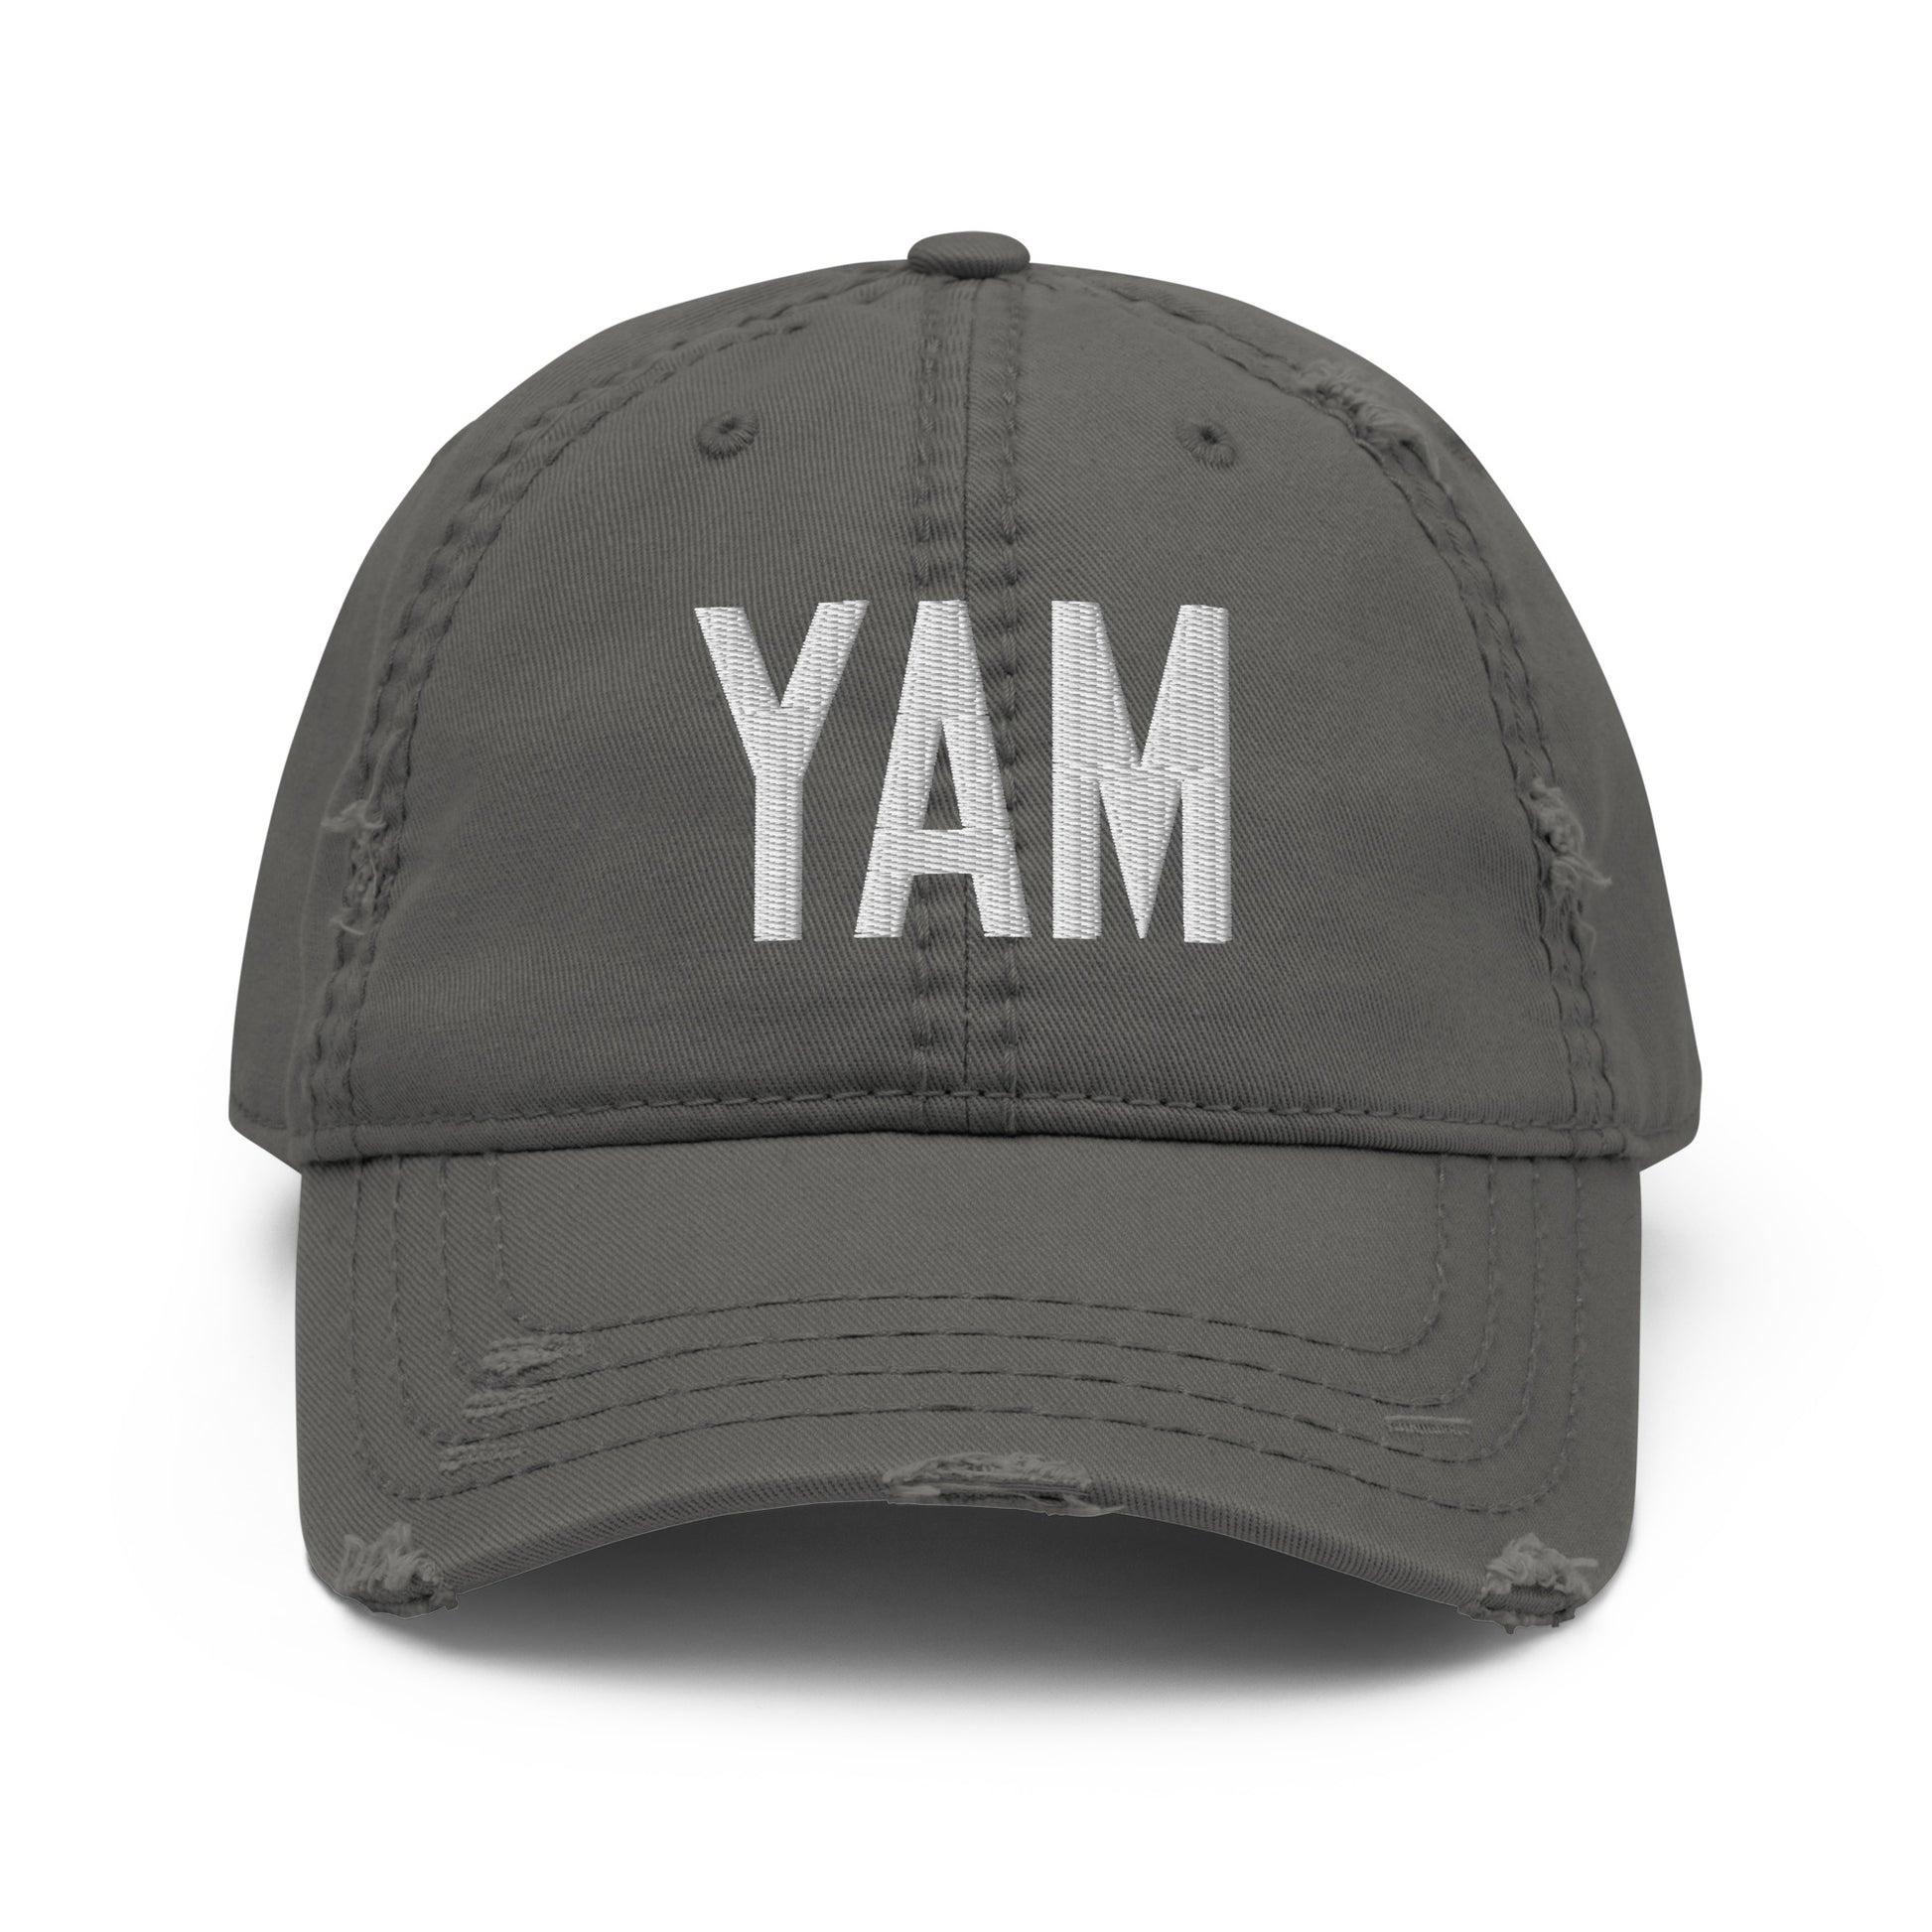 Airport Code Distressed Hat - White • YAM Sault-Ste-Marie • YHM Designs - Image 15